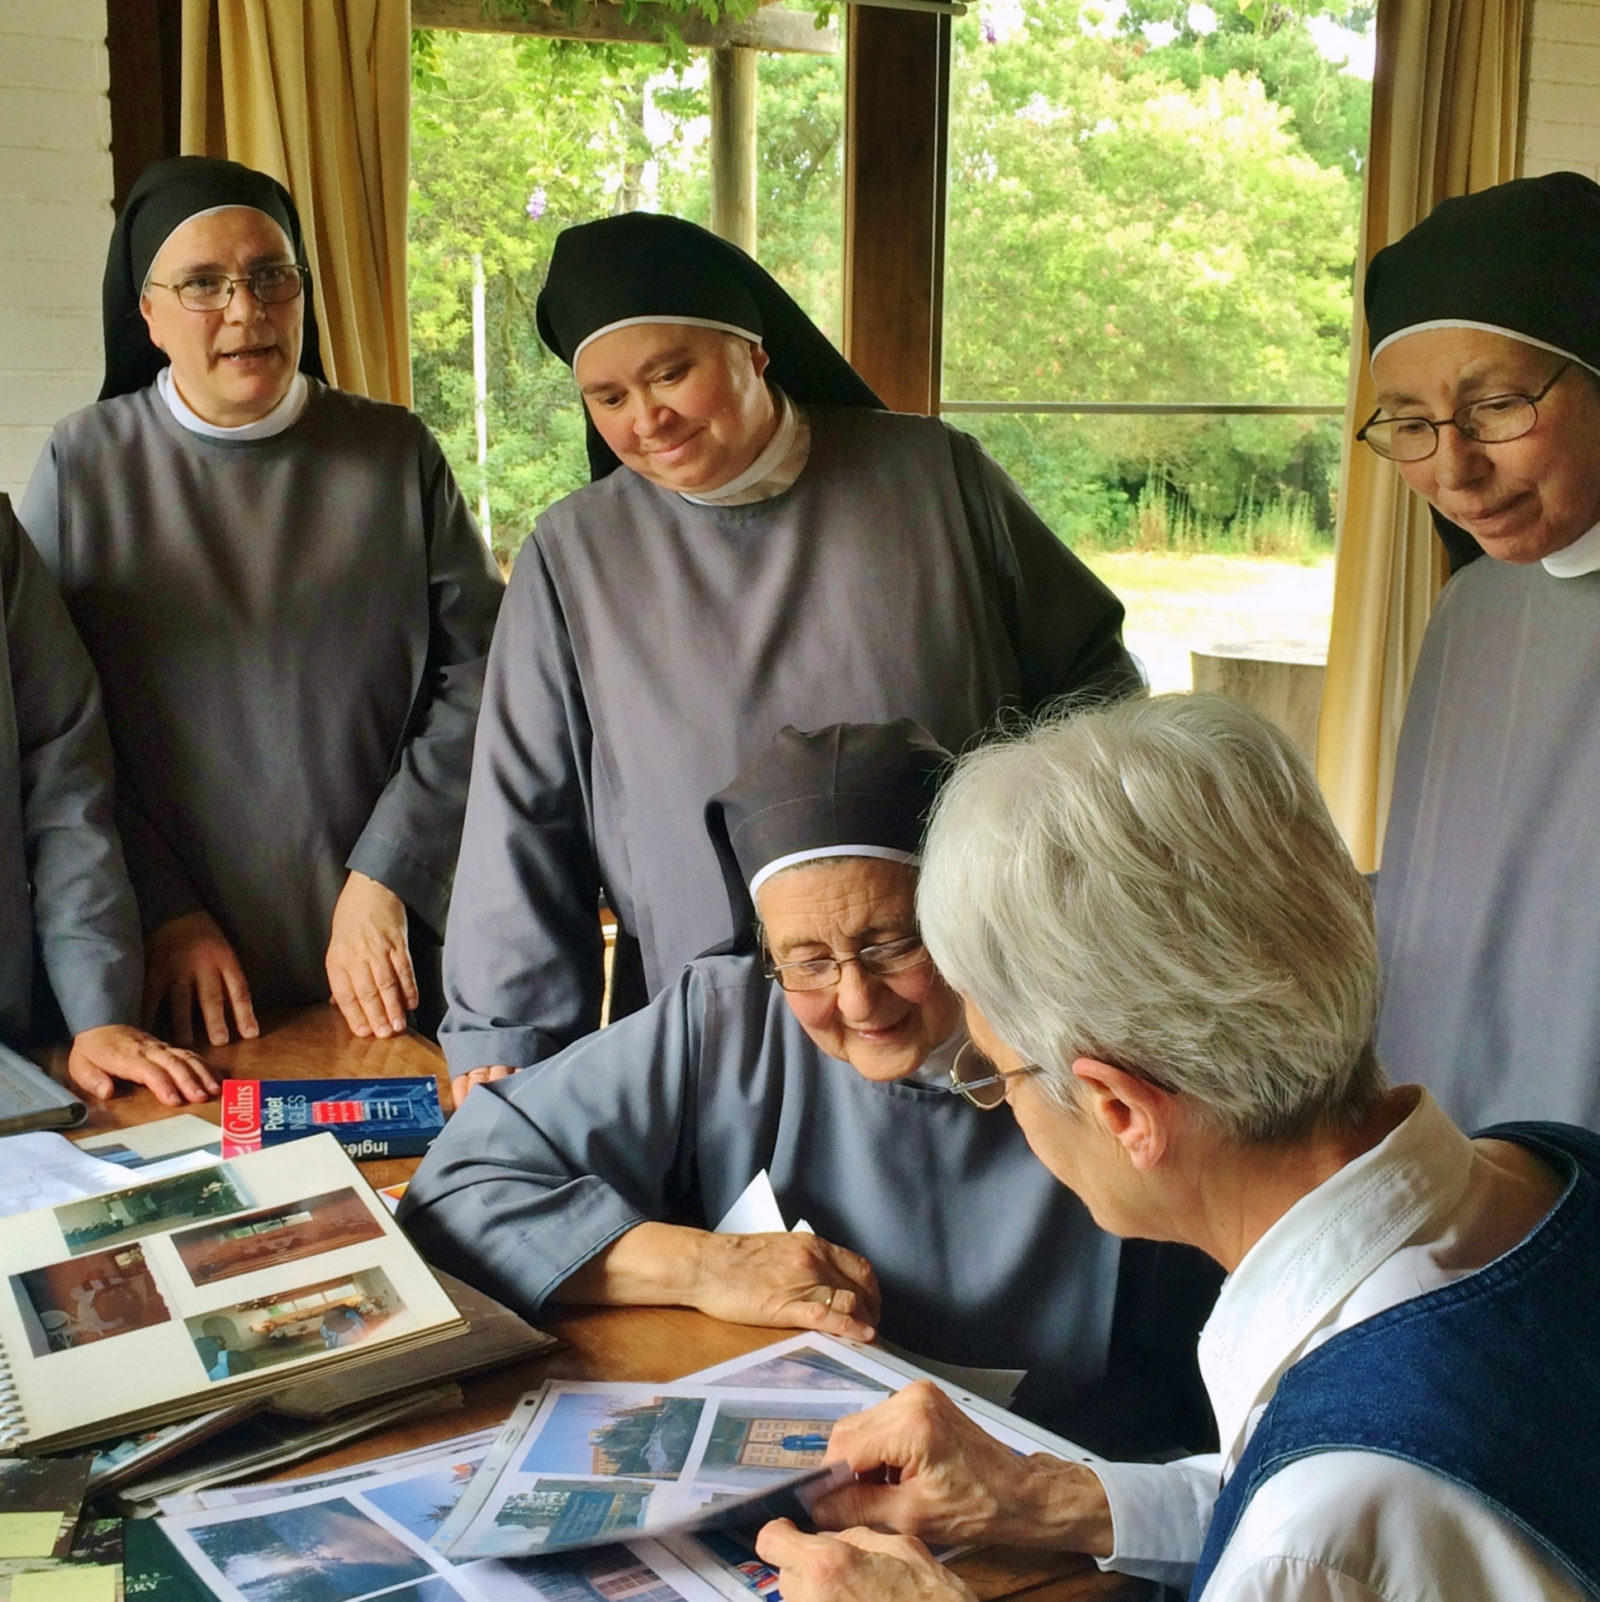 On a visit to Monasterio Santa Maria de Rautén, Sister Theresa Spinler and the Chilean Sisters share photograph albums.